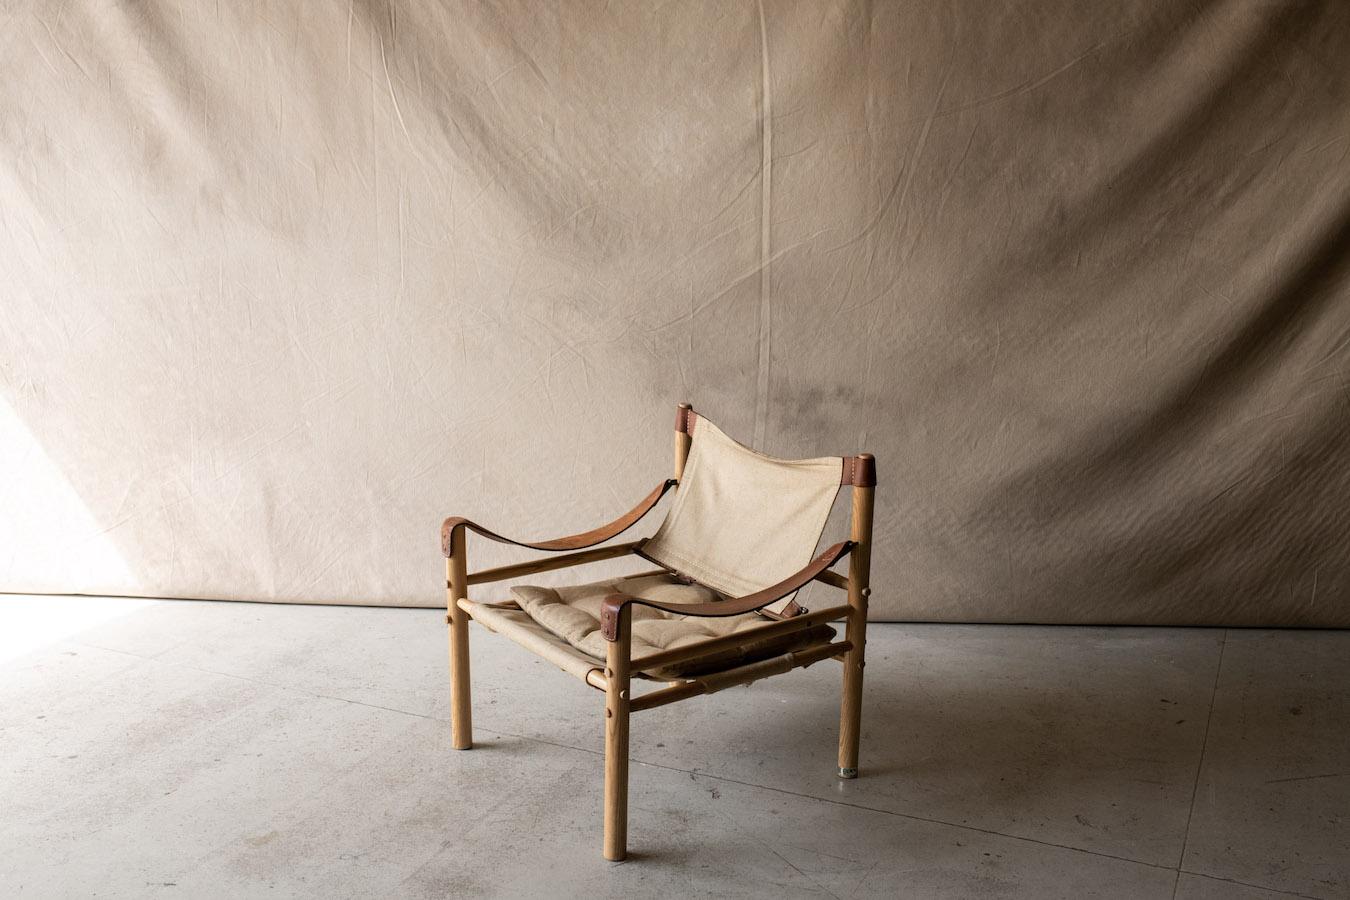 European Vintage Canvas Arne Norell Lounge Chair From Sweden, Circa 1970